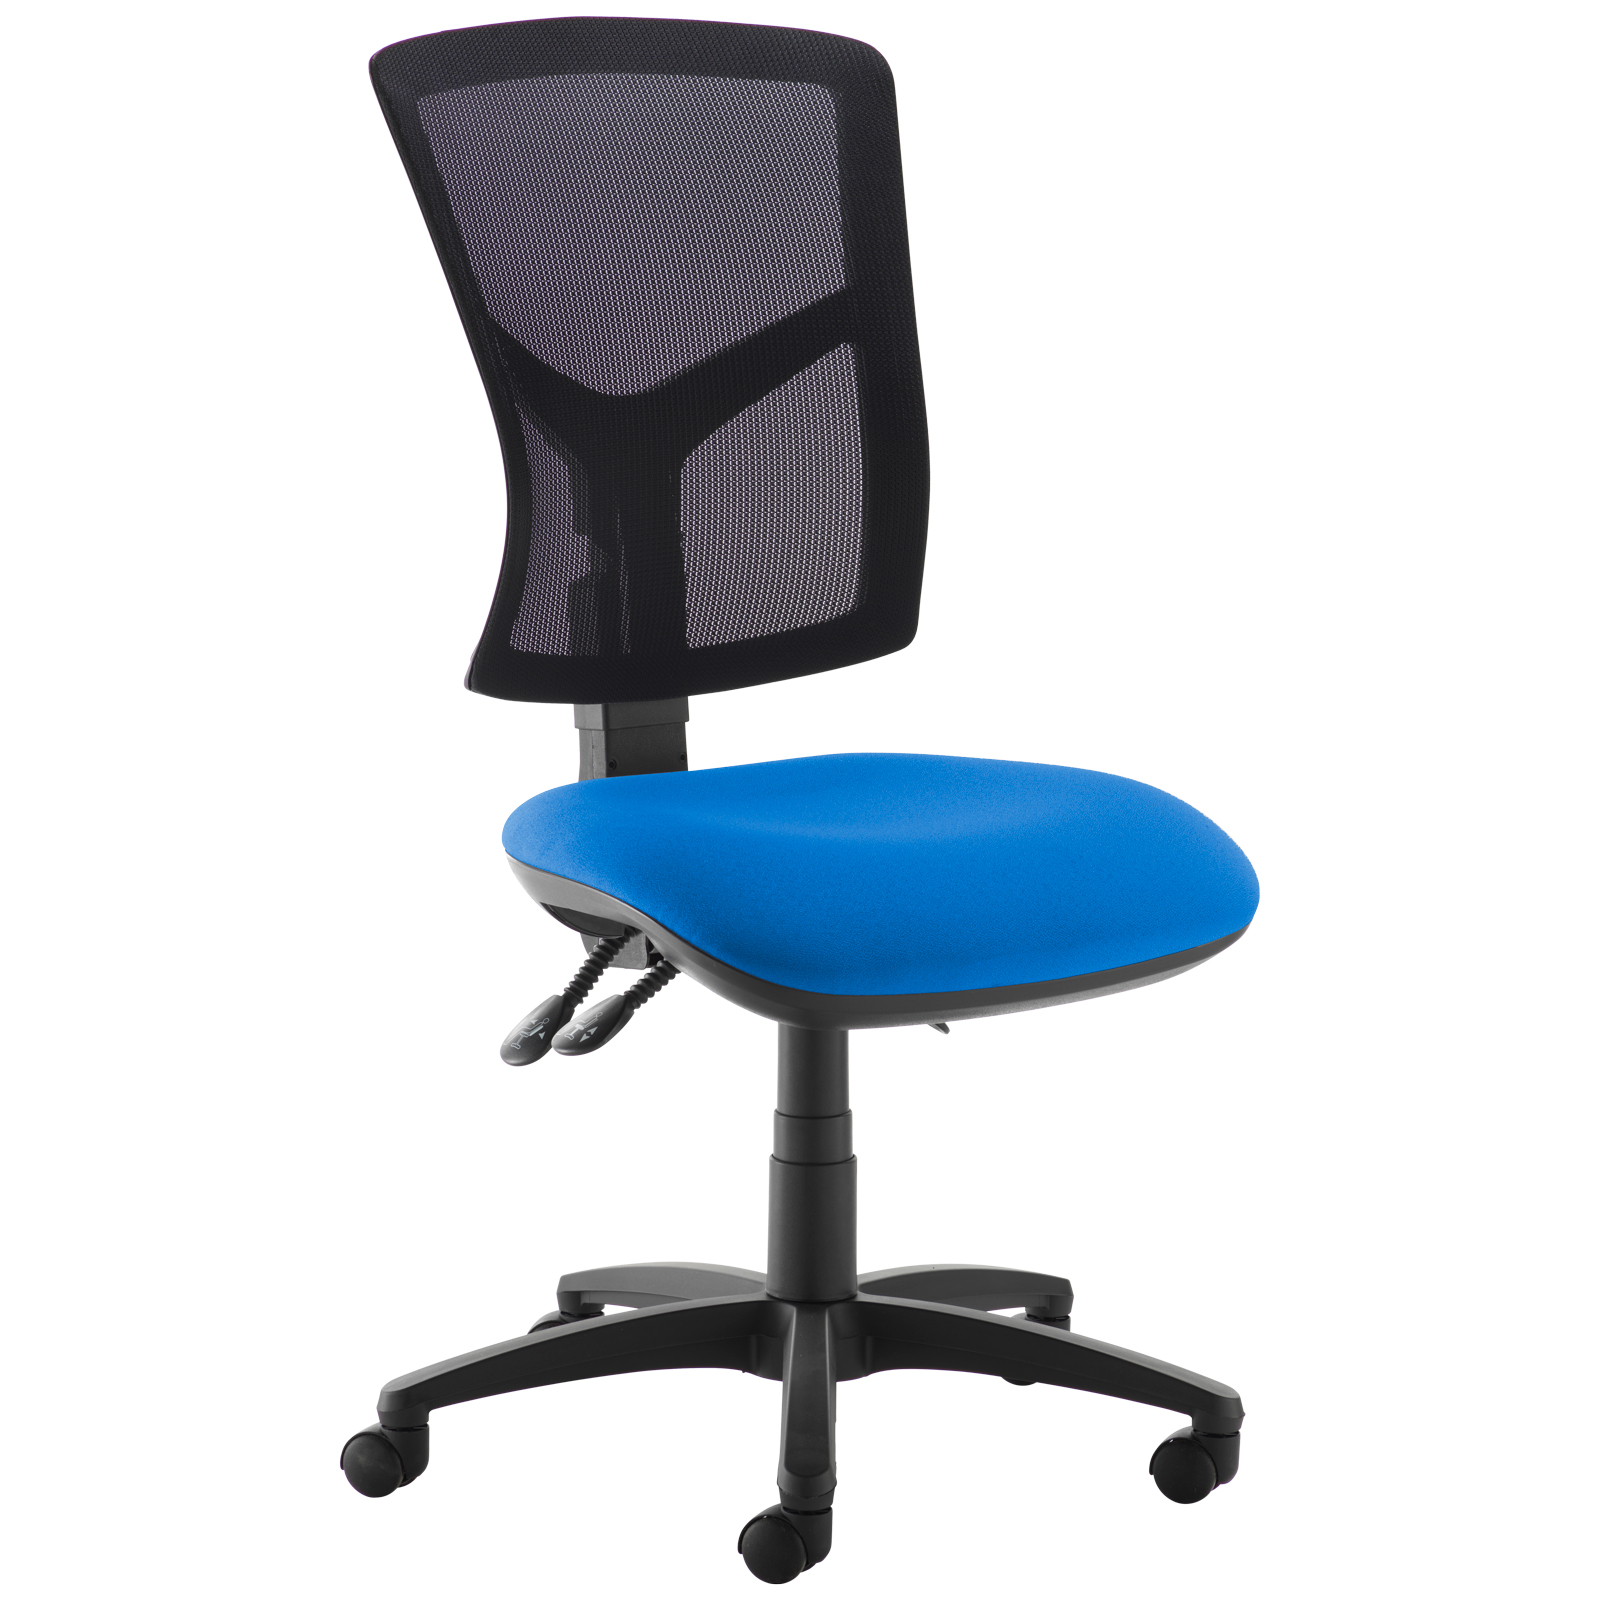 Senza high mesh back operator chair with no arms - blue